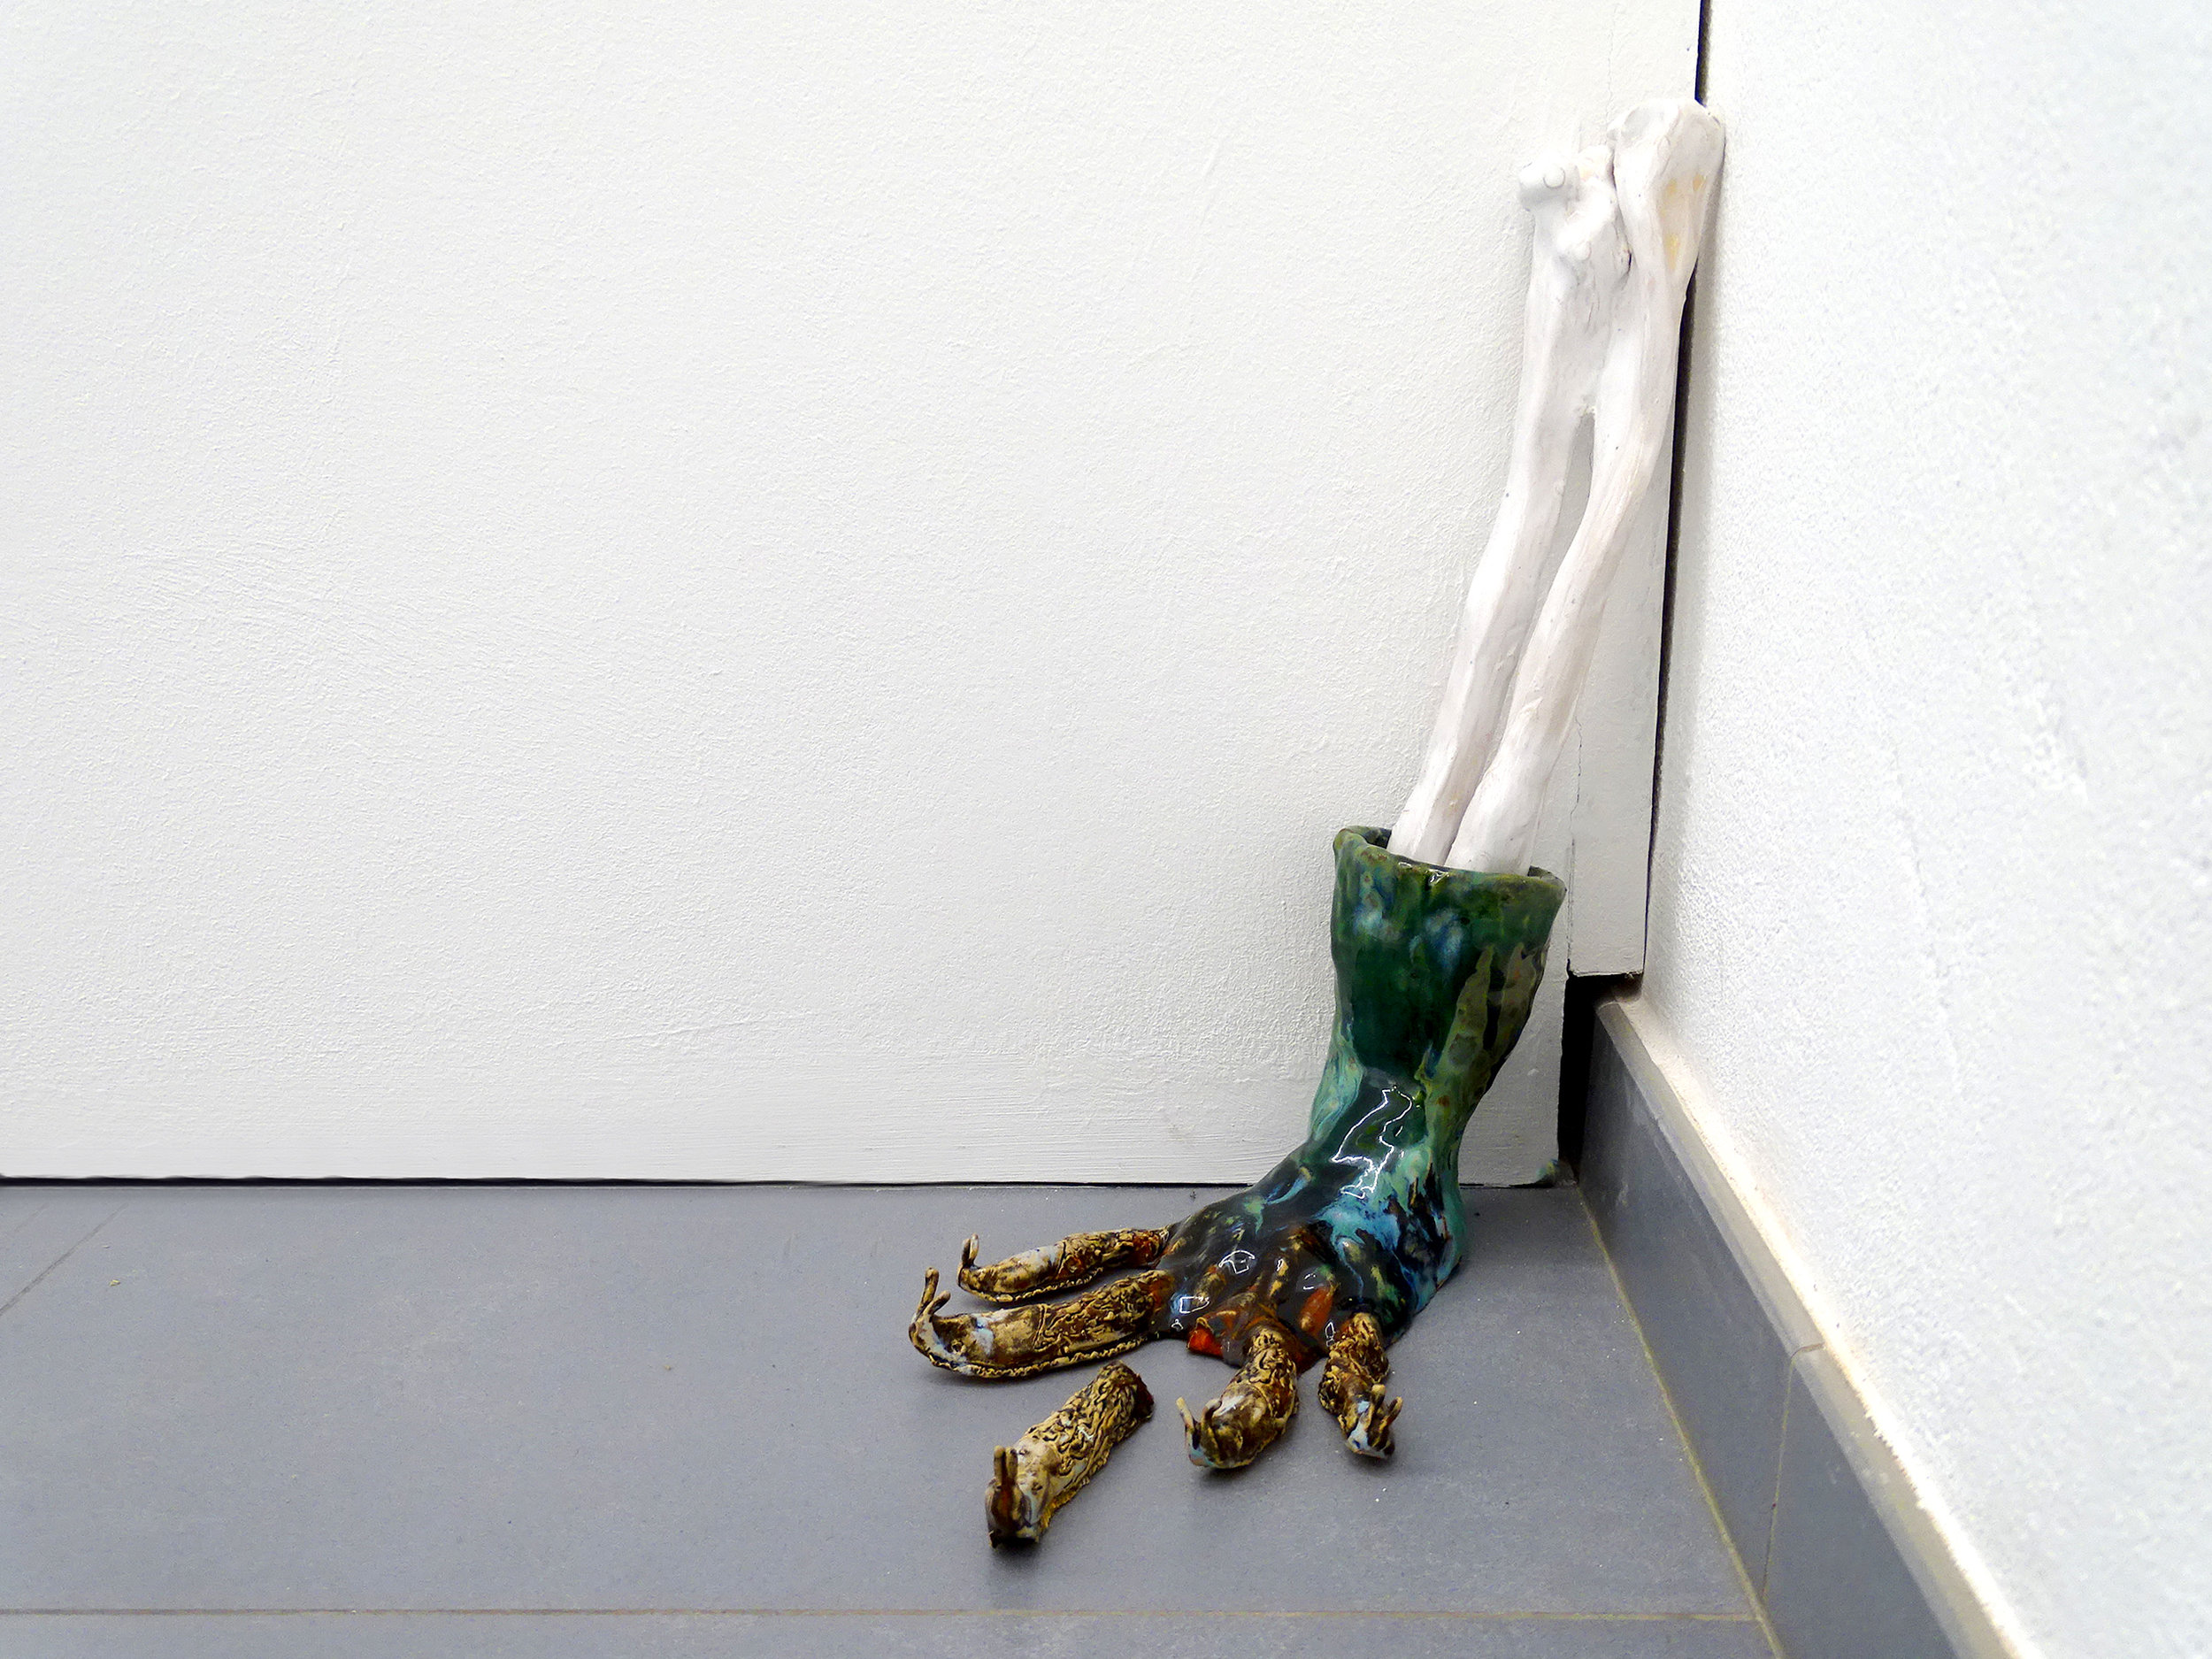 (19)  Of All the Things I’ve Lost Proudick (Lindsey Mendick & Paloma Proudfoot) Hannah Barry Gallery at Ballon Rouge Club, Brussels  Lindsey Mendick She's a danger to herself, 2019 Glazed ceramic 38 x 26 x 15 cm court.jpg